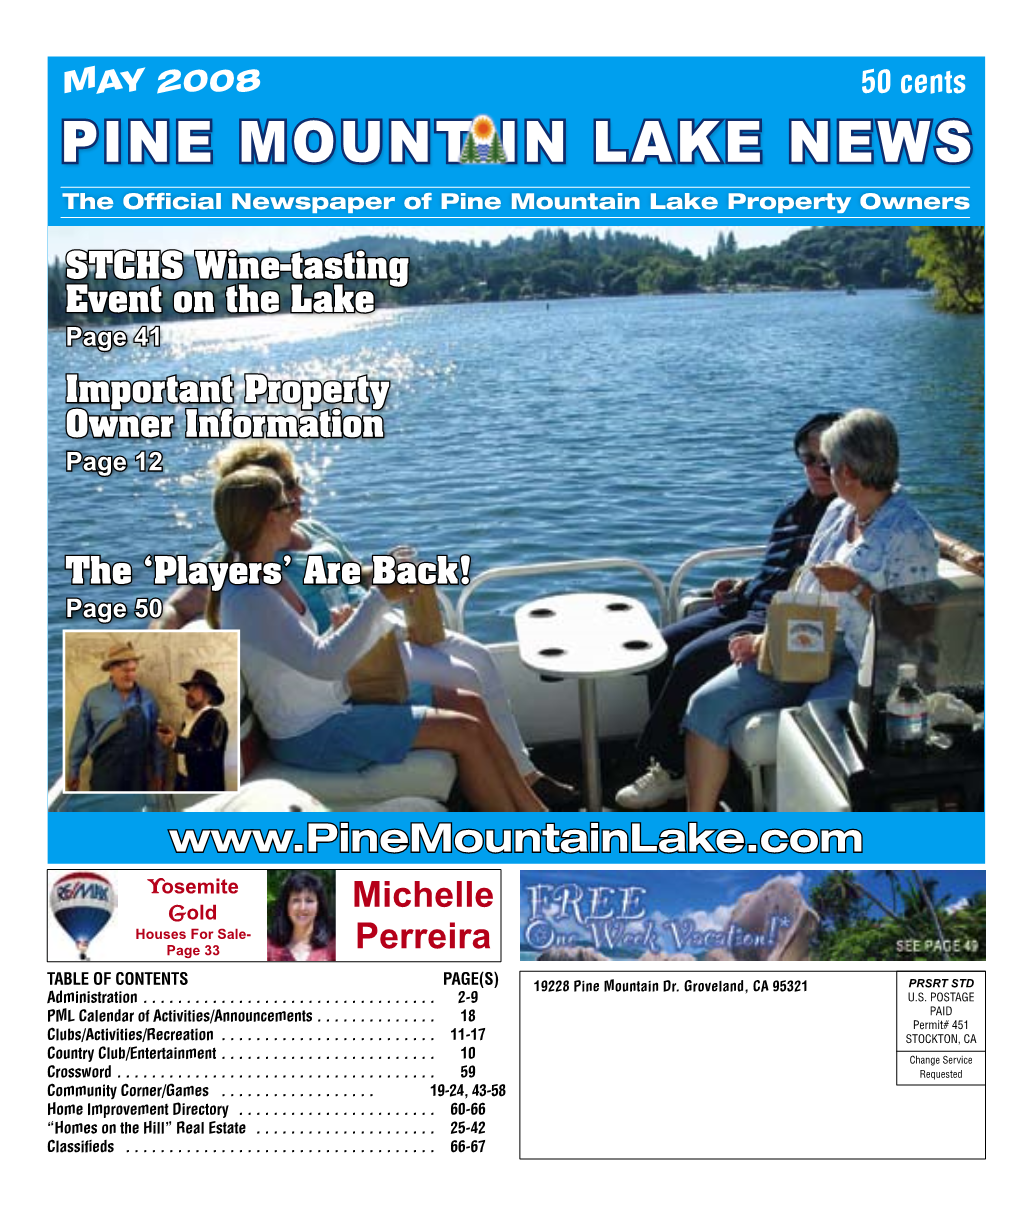 Pine Mount in Lake NEWS the Official Newspaper of Pine Mountain Lake Property Owners